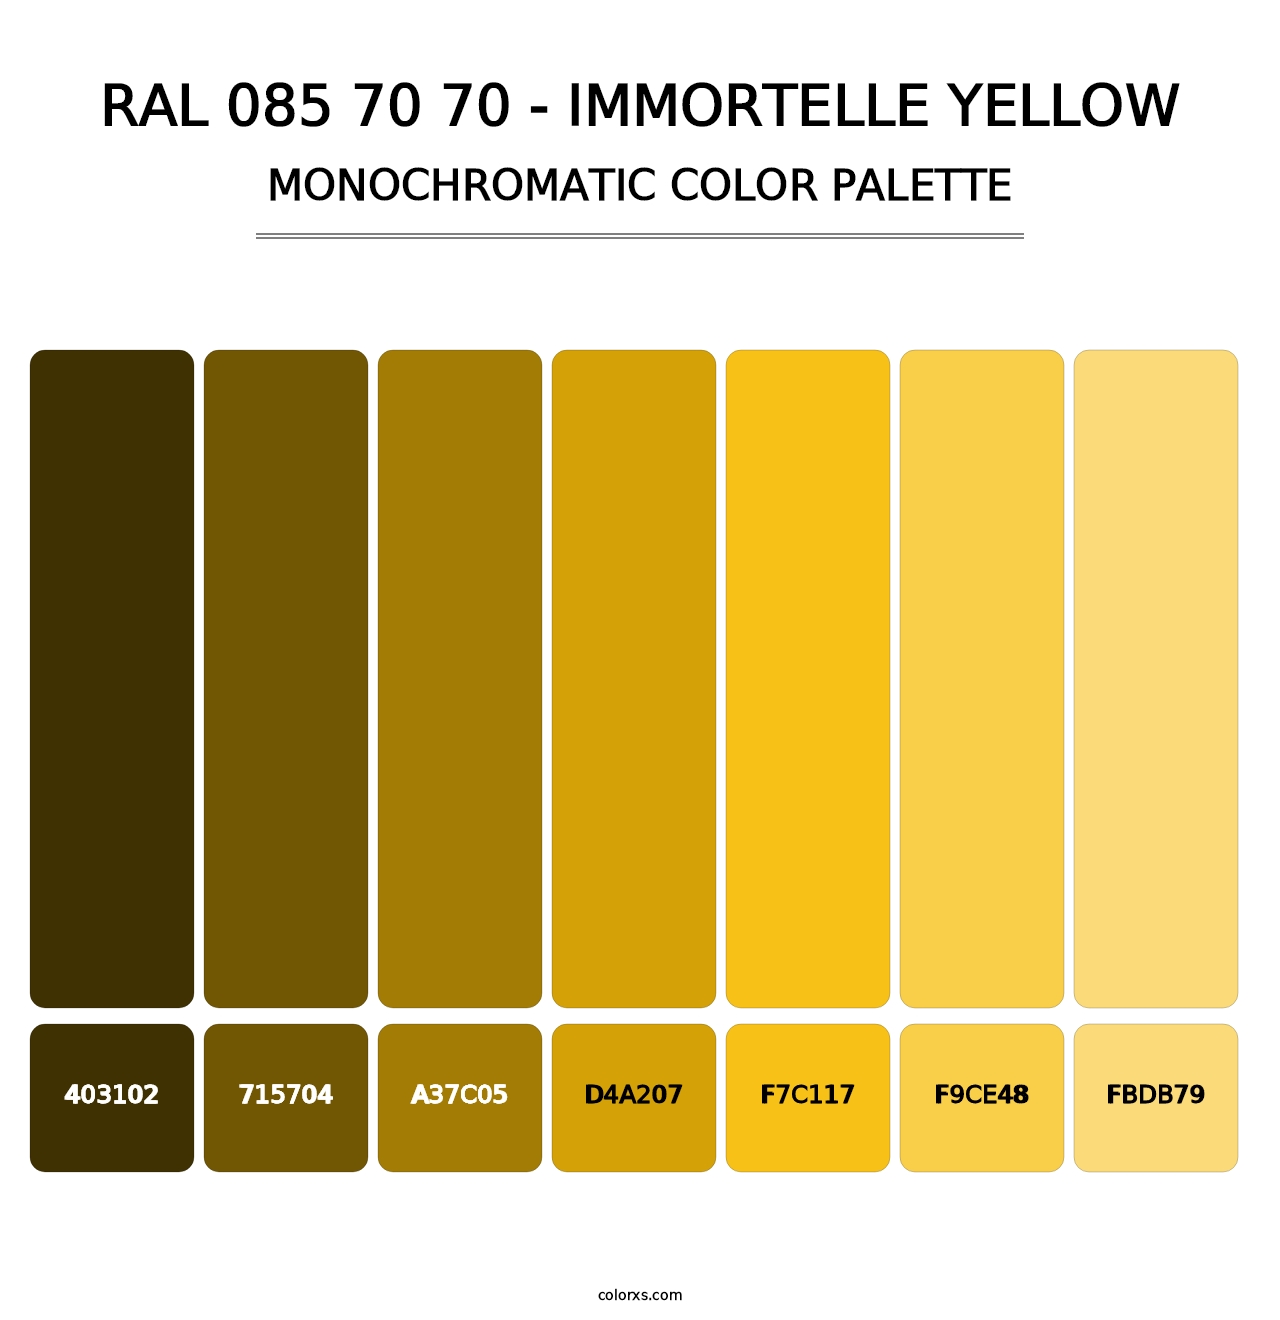 RAL 085 70 70 - Immortelle Yellow - Monochromatic Color Palette